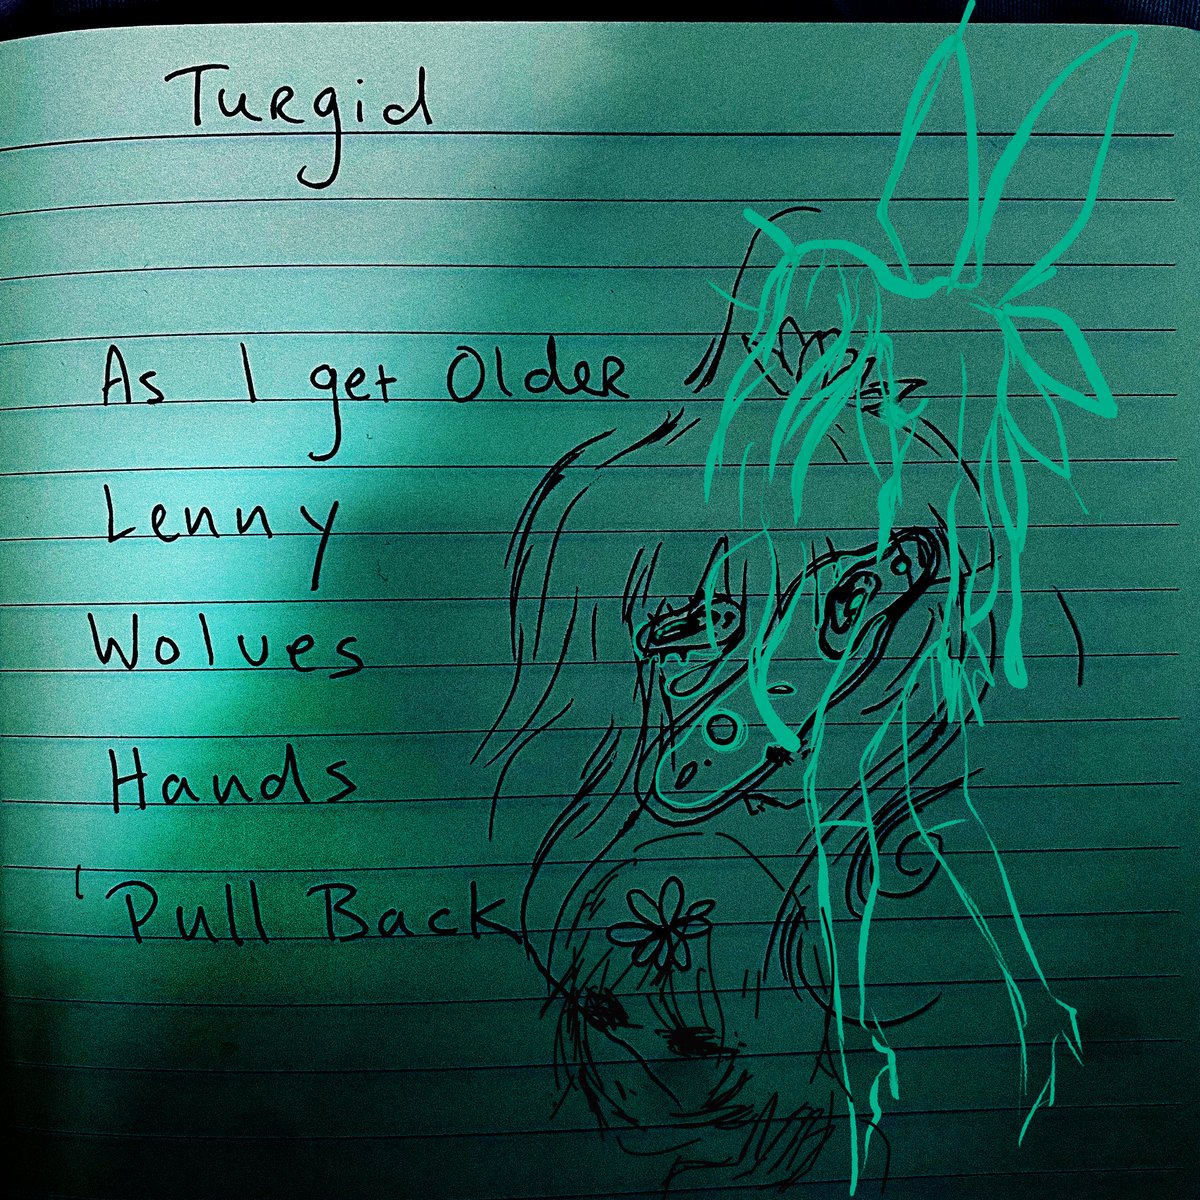 Turgid - my second EP - comes out this Friday via Is Right Records. It’s been a whole process to make this gyal; she’s moody and she’s shouty and she’s sad and she’s full of stuff and confused but she’s looking to grow —- like a turgid plant cell! Presave Link in bio xxx